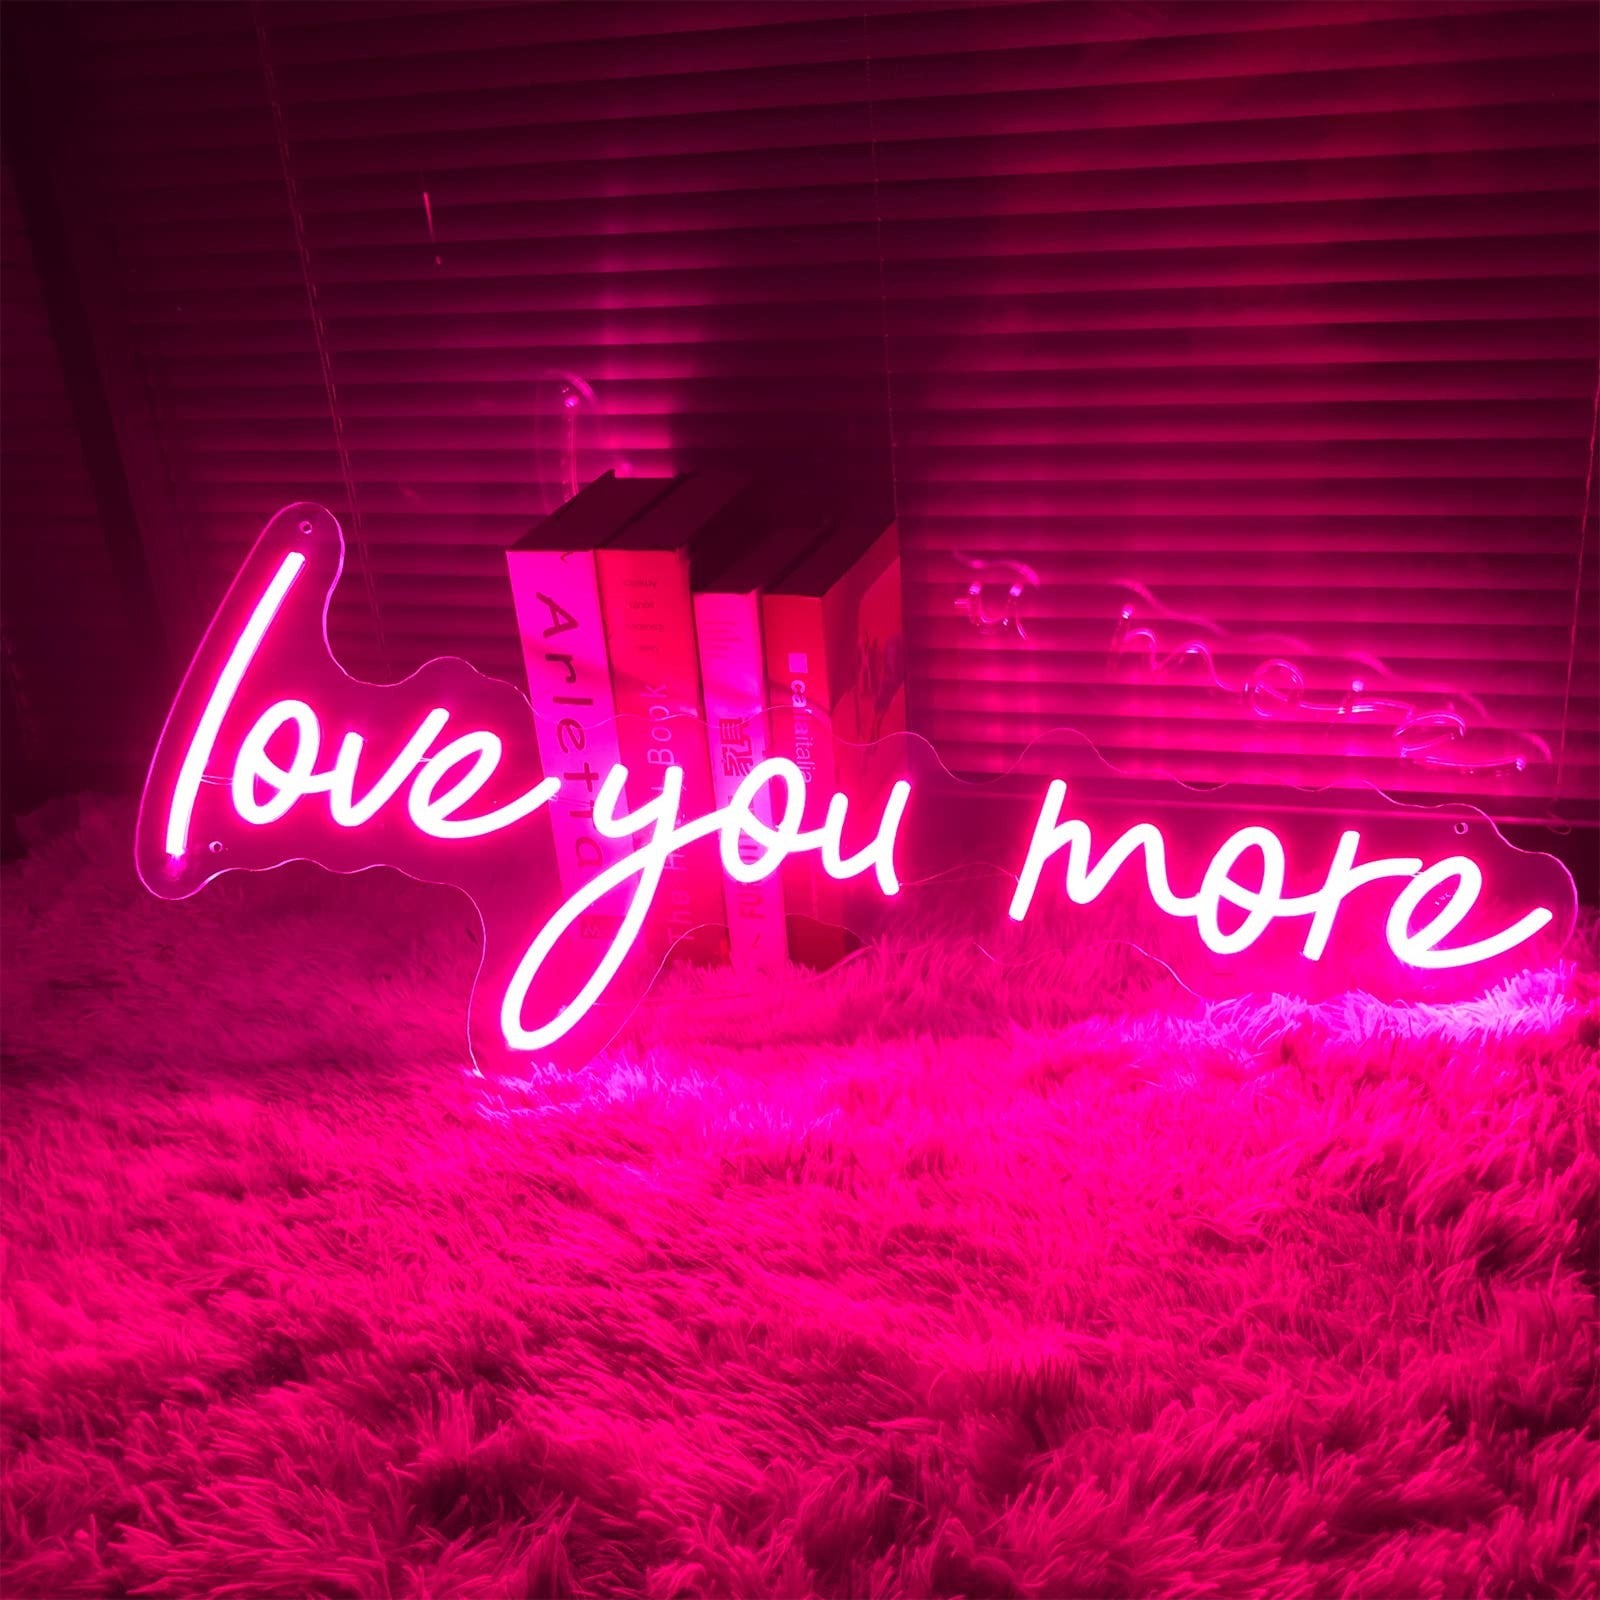 LED neon lights for fathers create a powerful visual representation of love